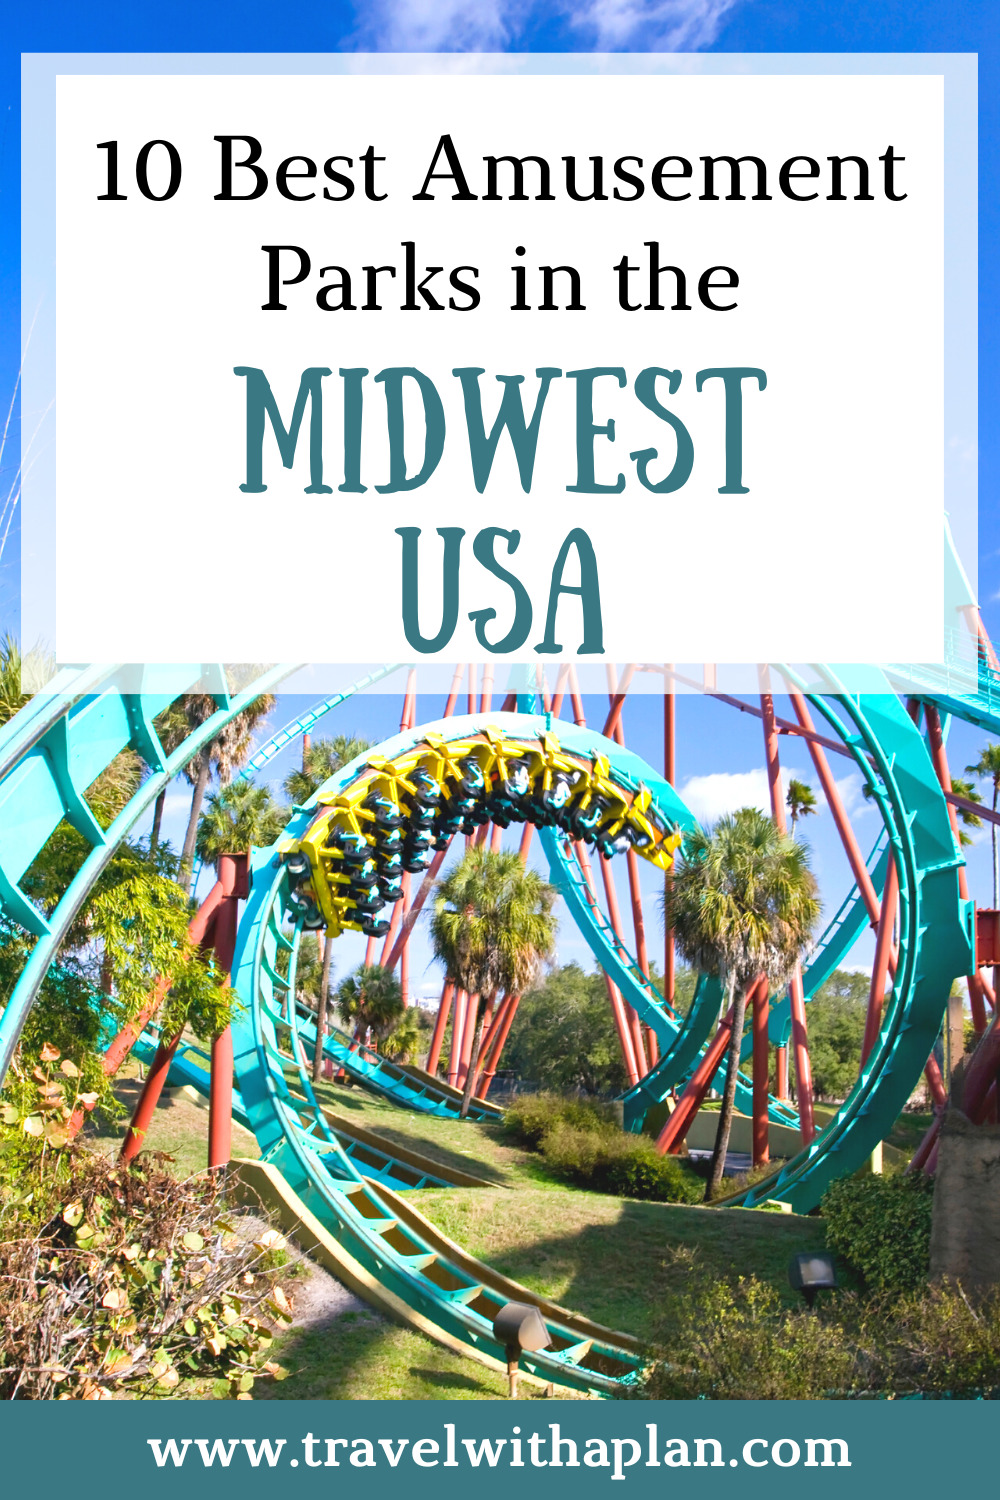 Find out the best amusement parks in the Midwest USA from top U.S. family travel blog, Travel With A Plan!